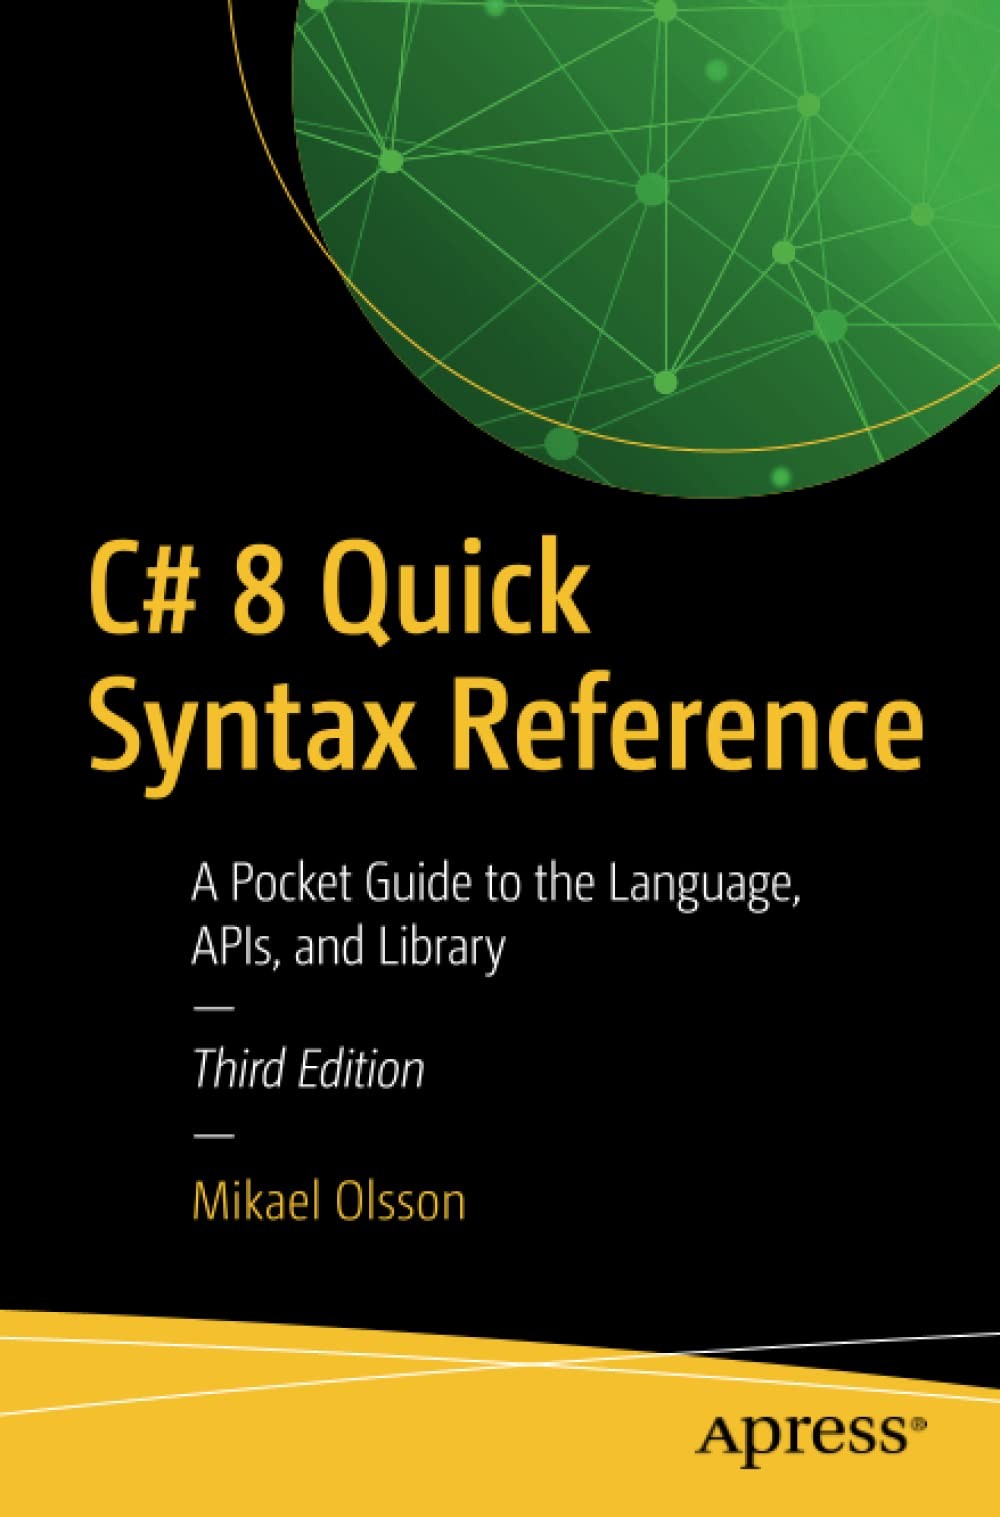 C# 8 Quick Syntax Reference: A Pocket Guide to the Language, APIs, and Library